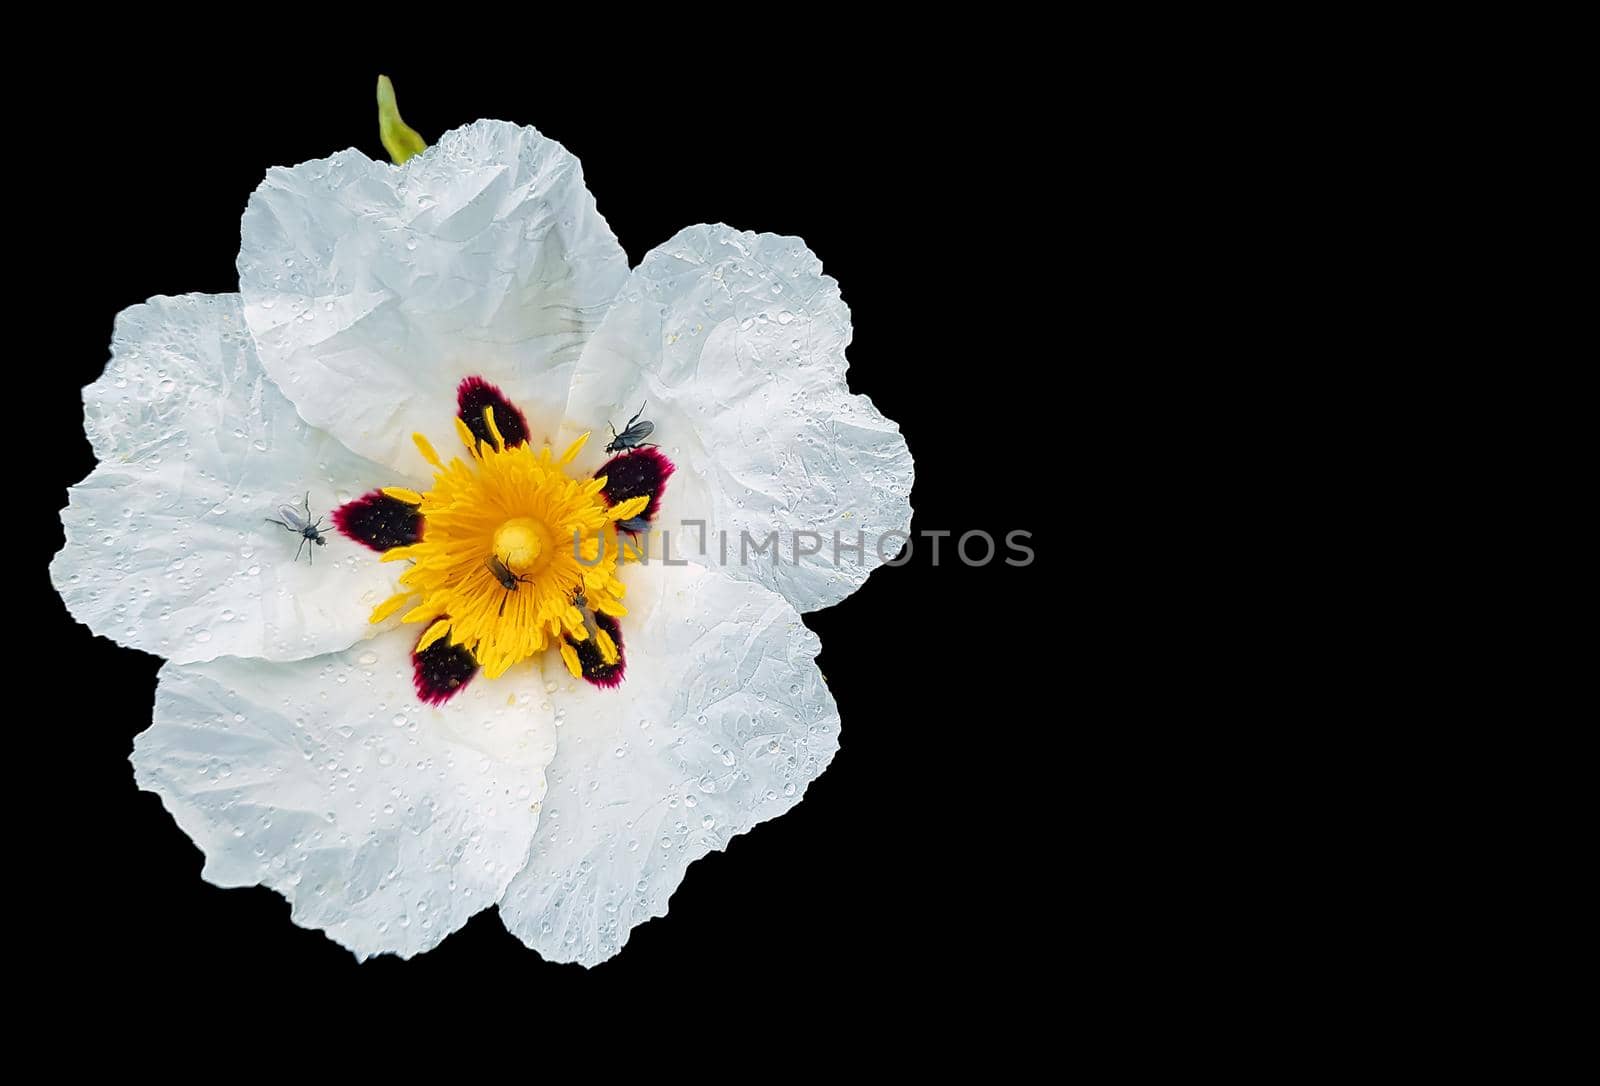 Blossomig Gum rockrose (cistus ladanifer) in the countryside from Alentejo in Portugal by devy